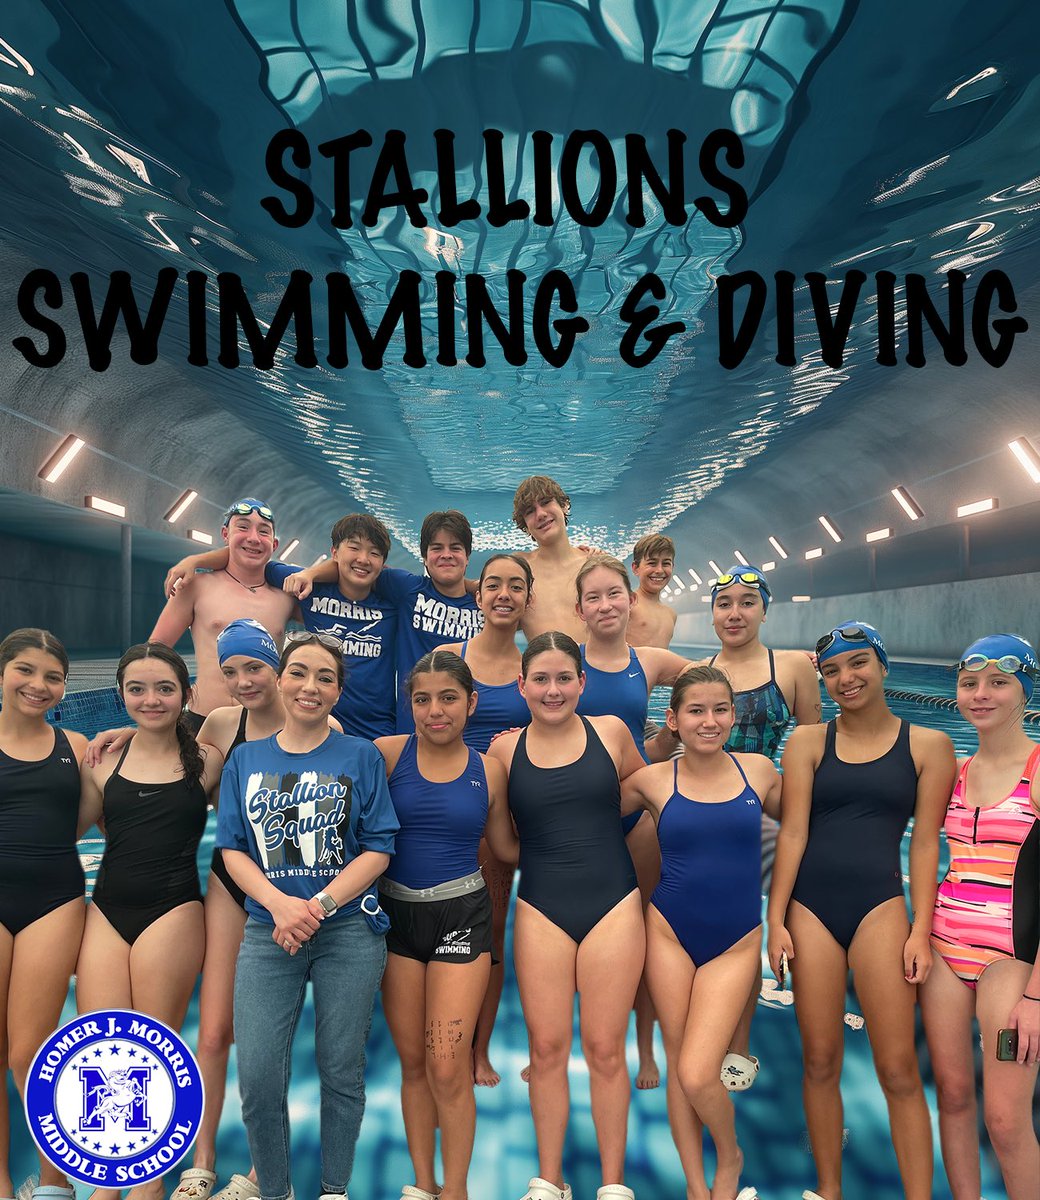 Good luck to our Stallion Swimmers as they compete in today’s meet! Hope y’all have a splash-tastic time!! 💙🤍💙🤍 #morrispride #districtofchampions #misd